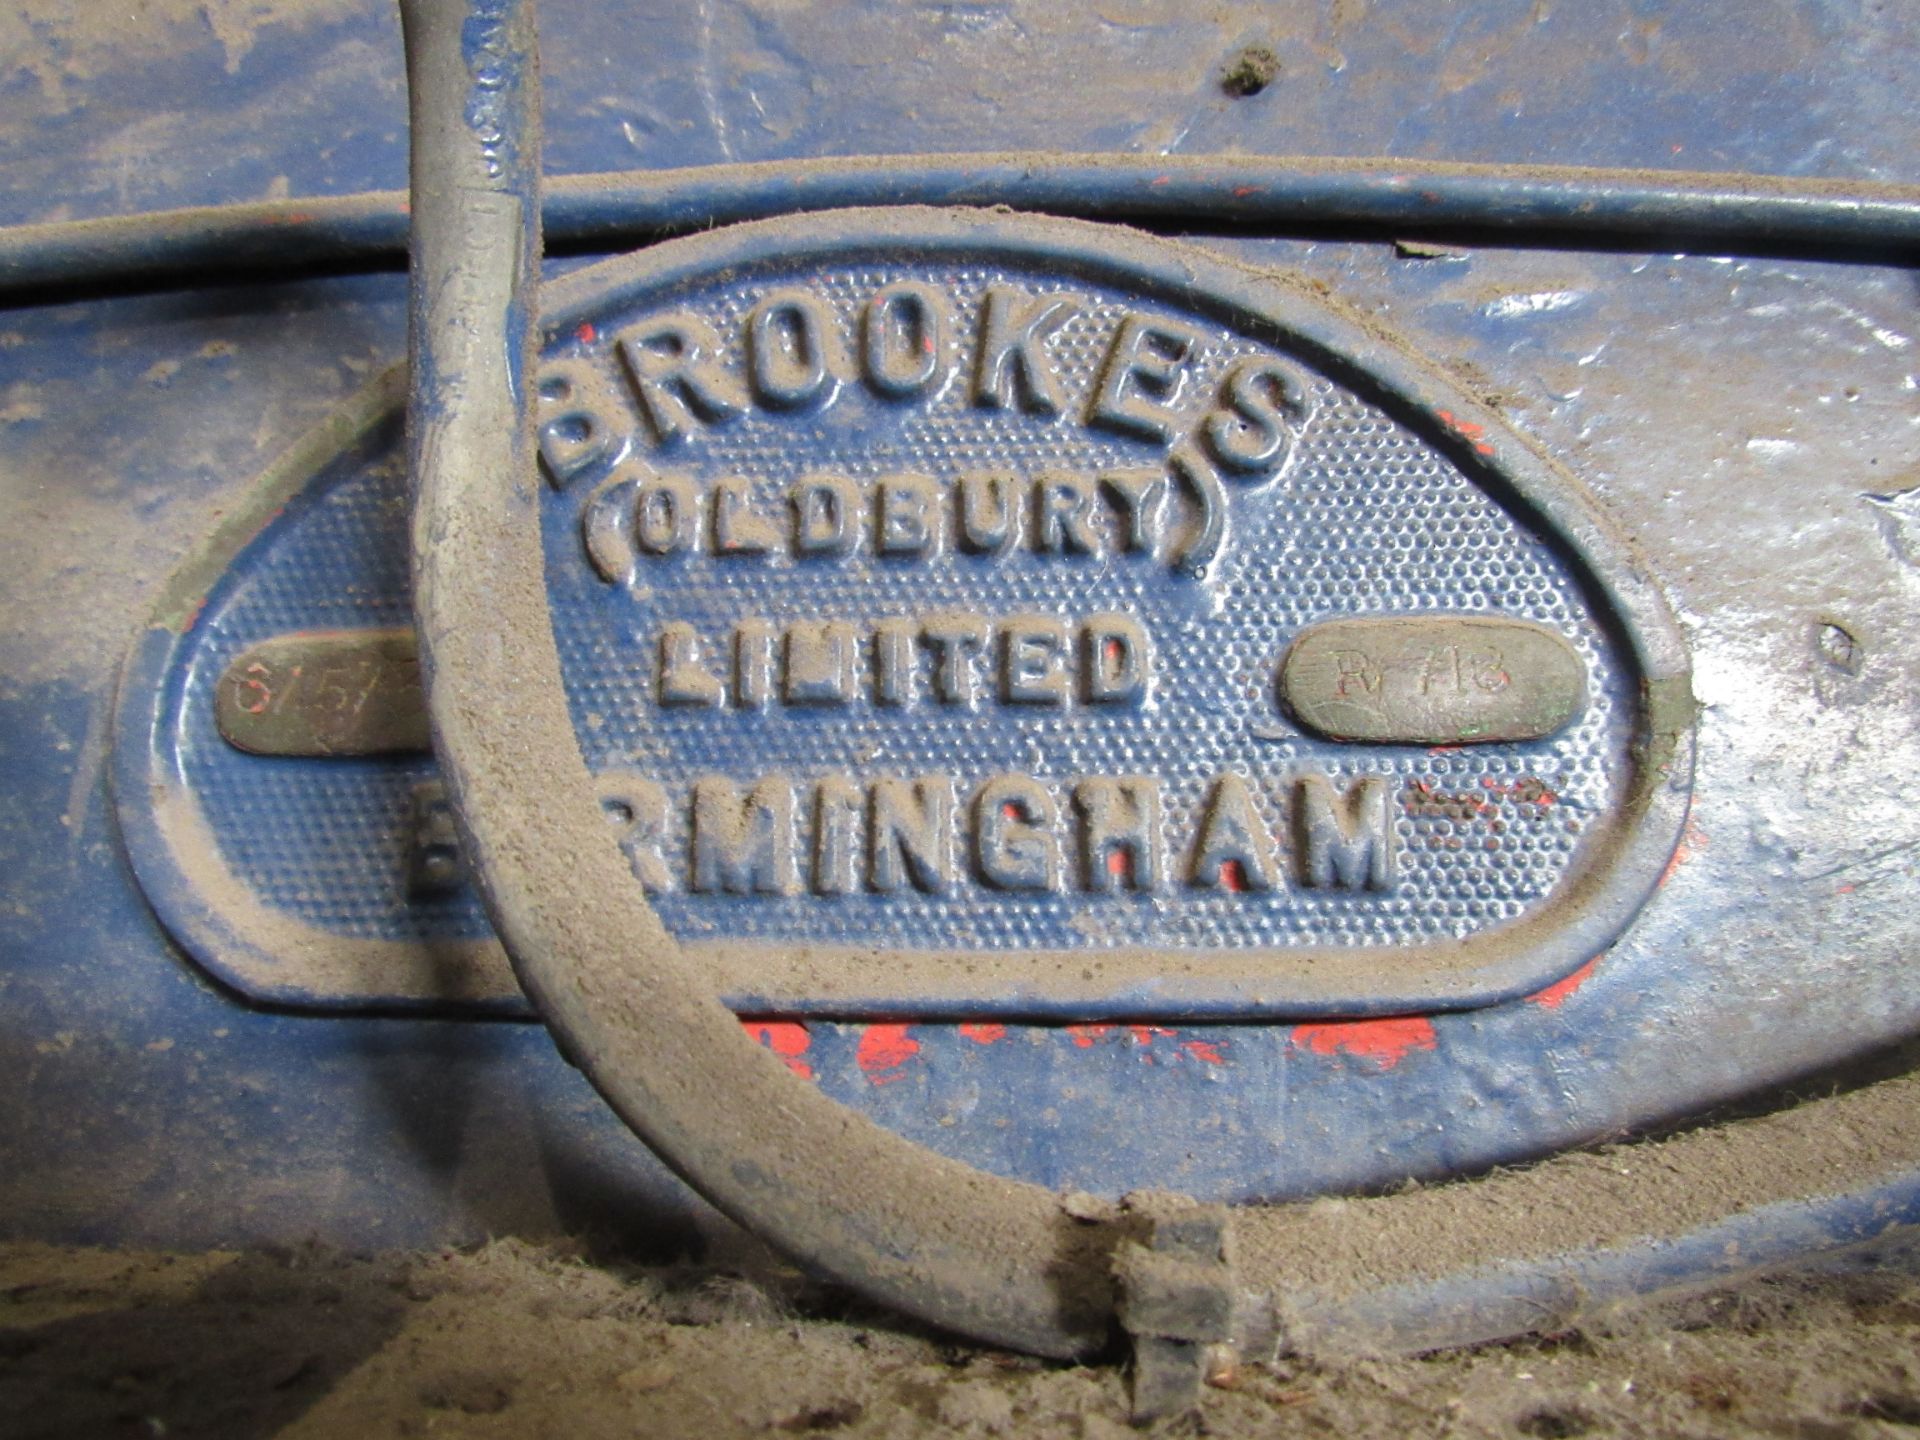 Brookes Shear 1200 x 12 capacity, 6/5/52, R718 (Requires disconnection by qualified electrician - Image 5 of 5